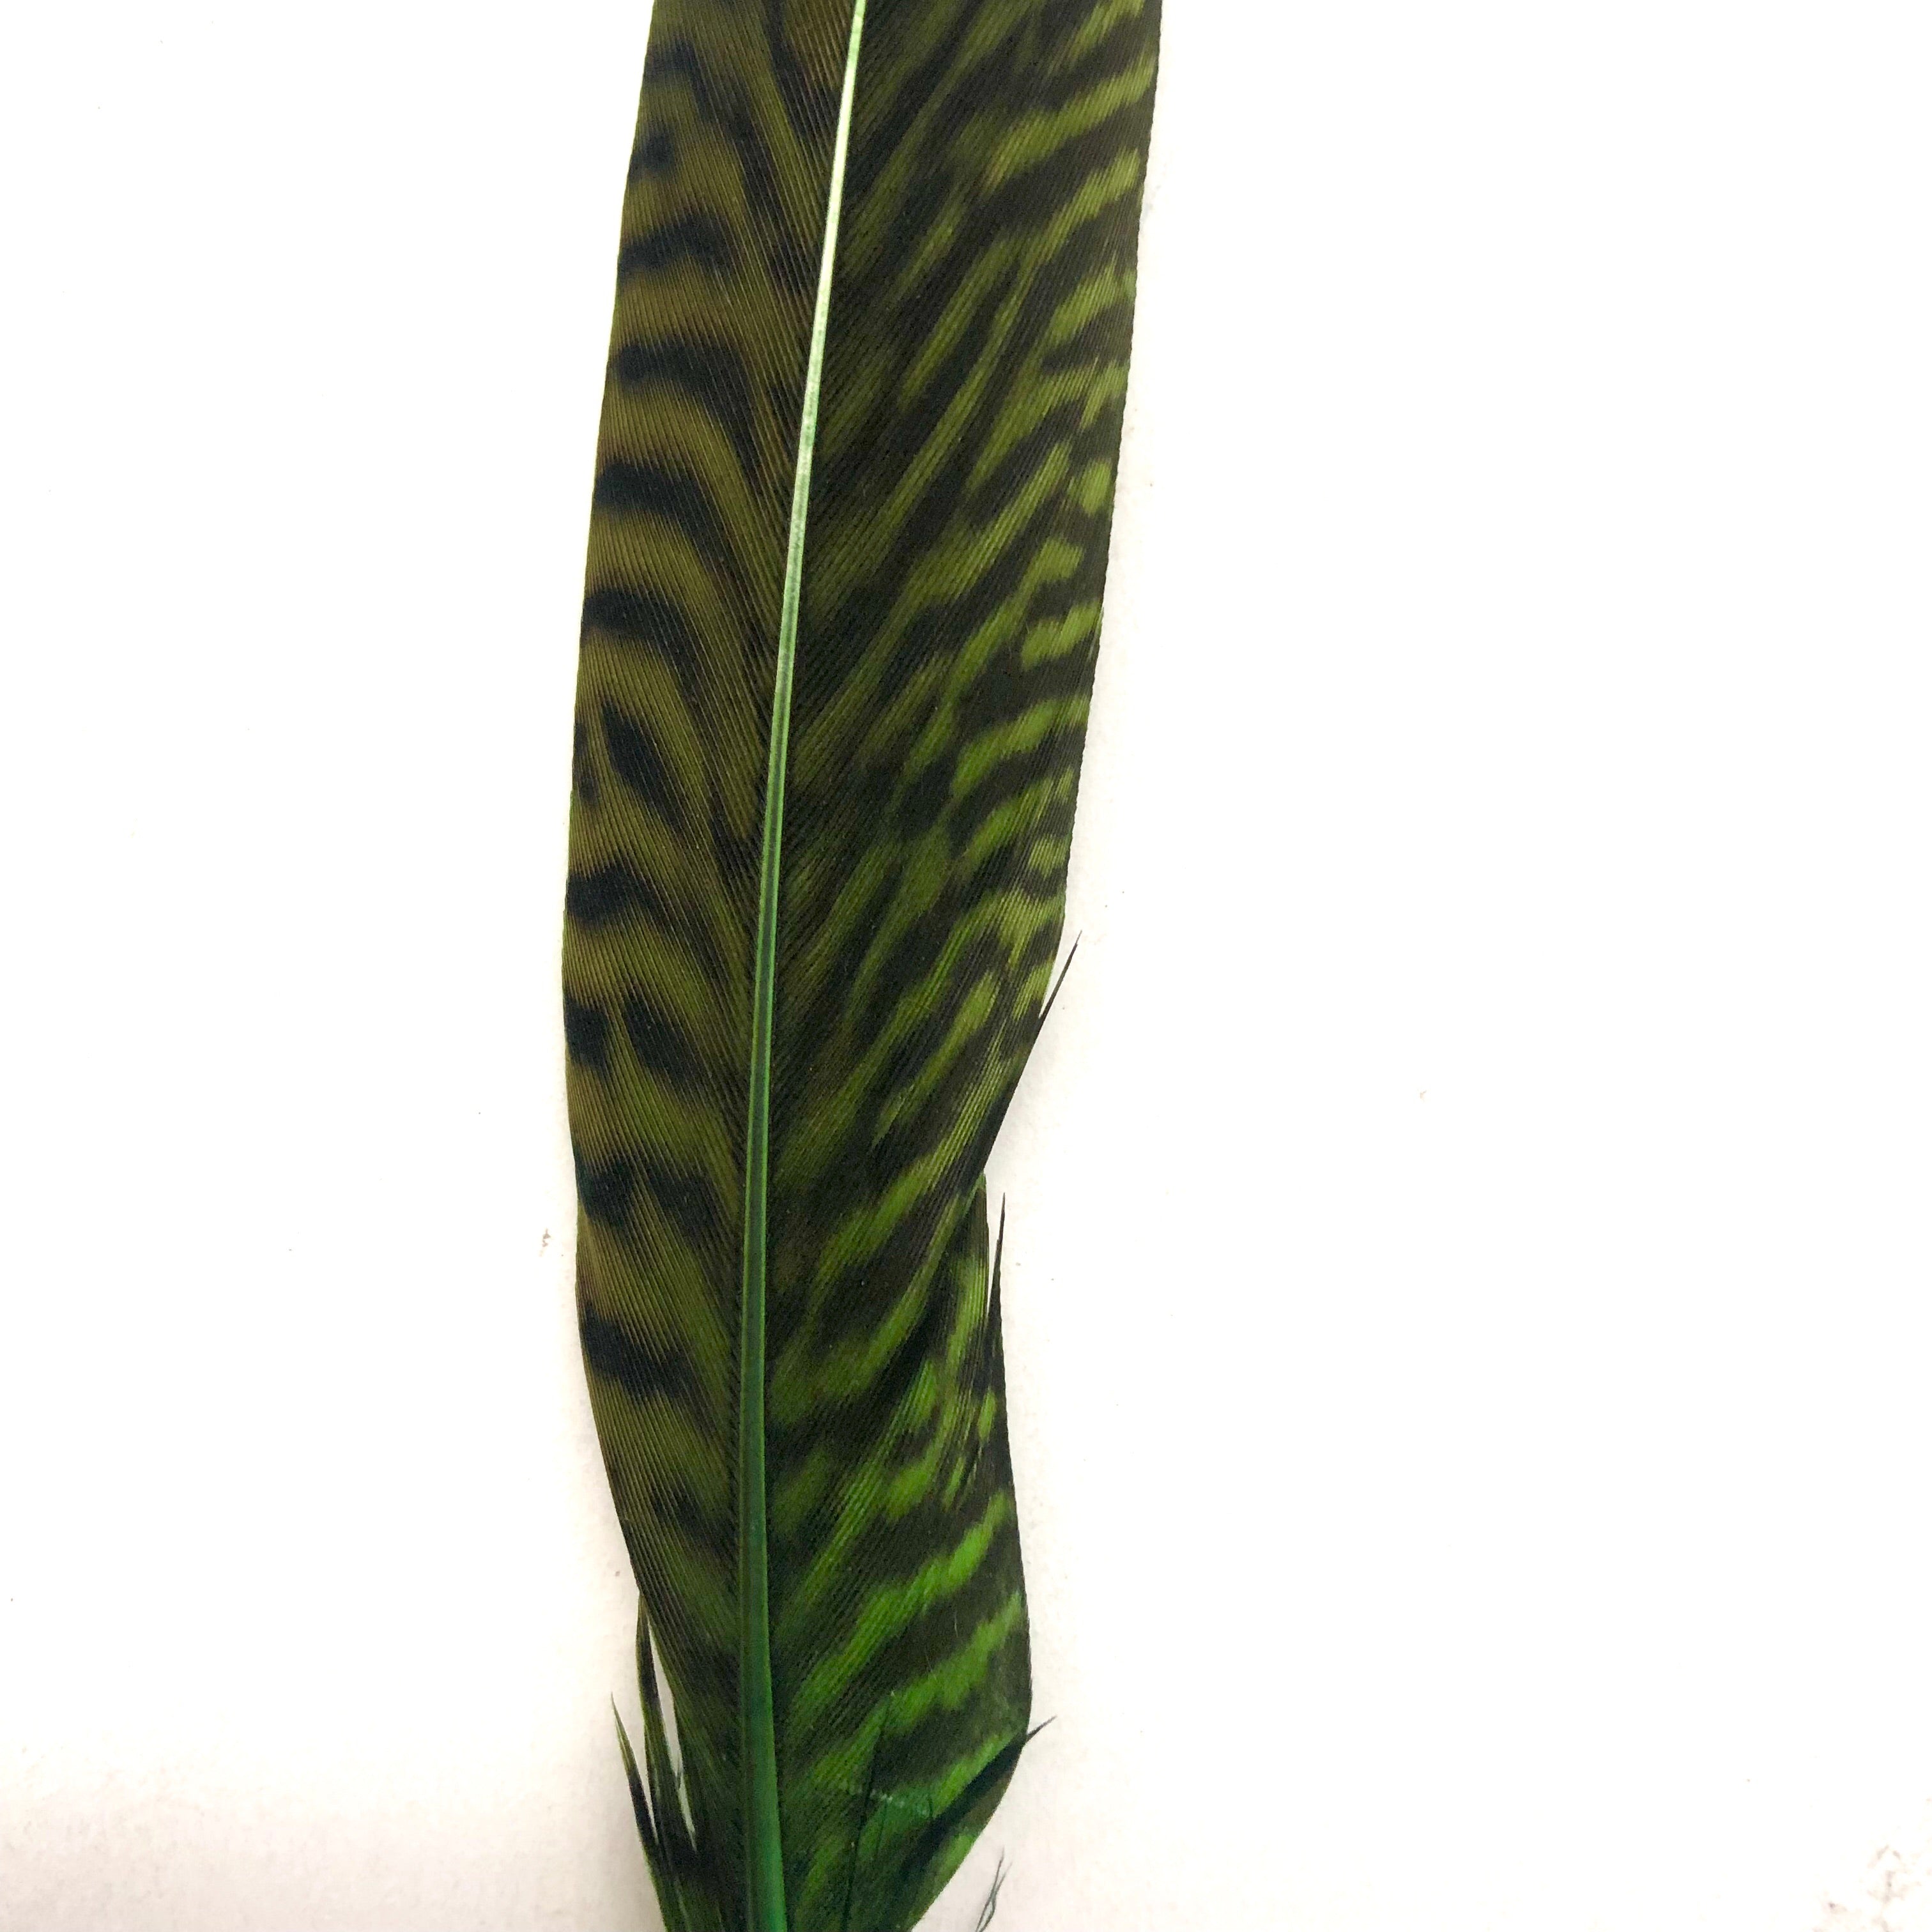 6" to 10" Golden Pheasant Side Tail Feather x 10 pcs - Lime Green